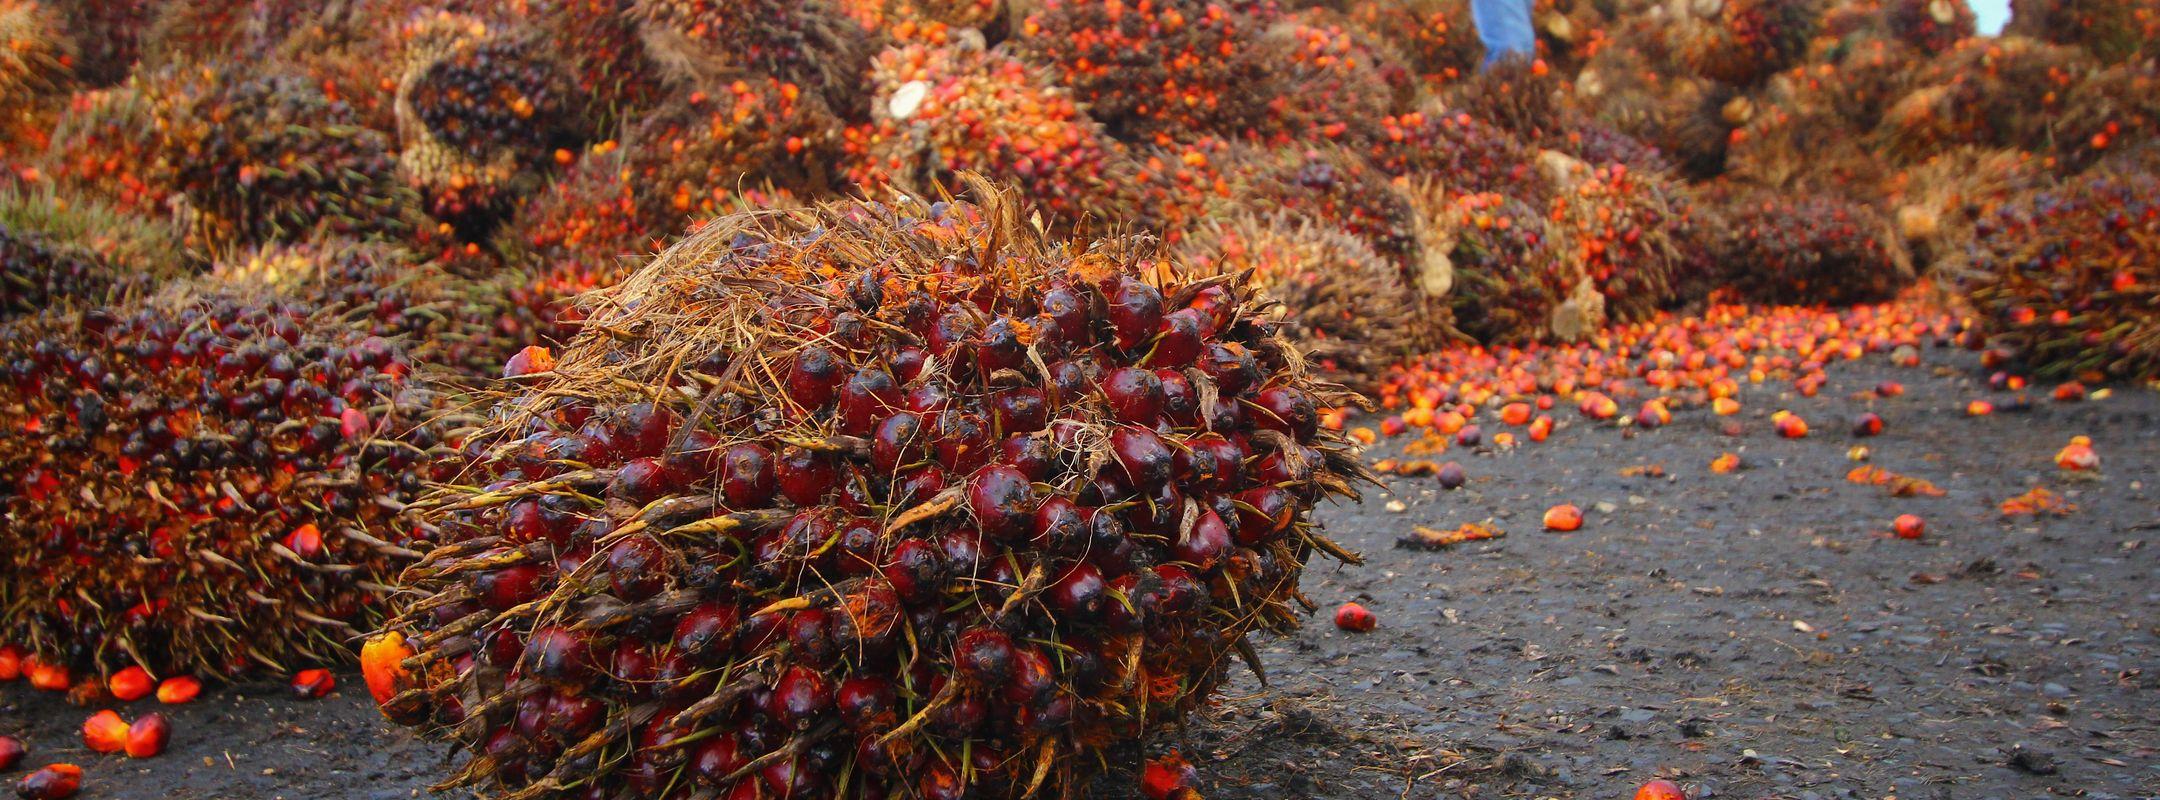 Oil palm fruits with workers in background